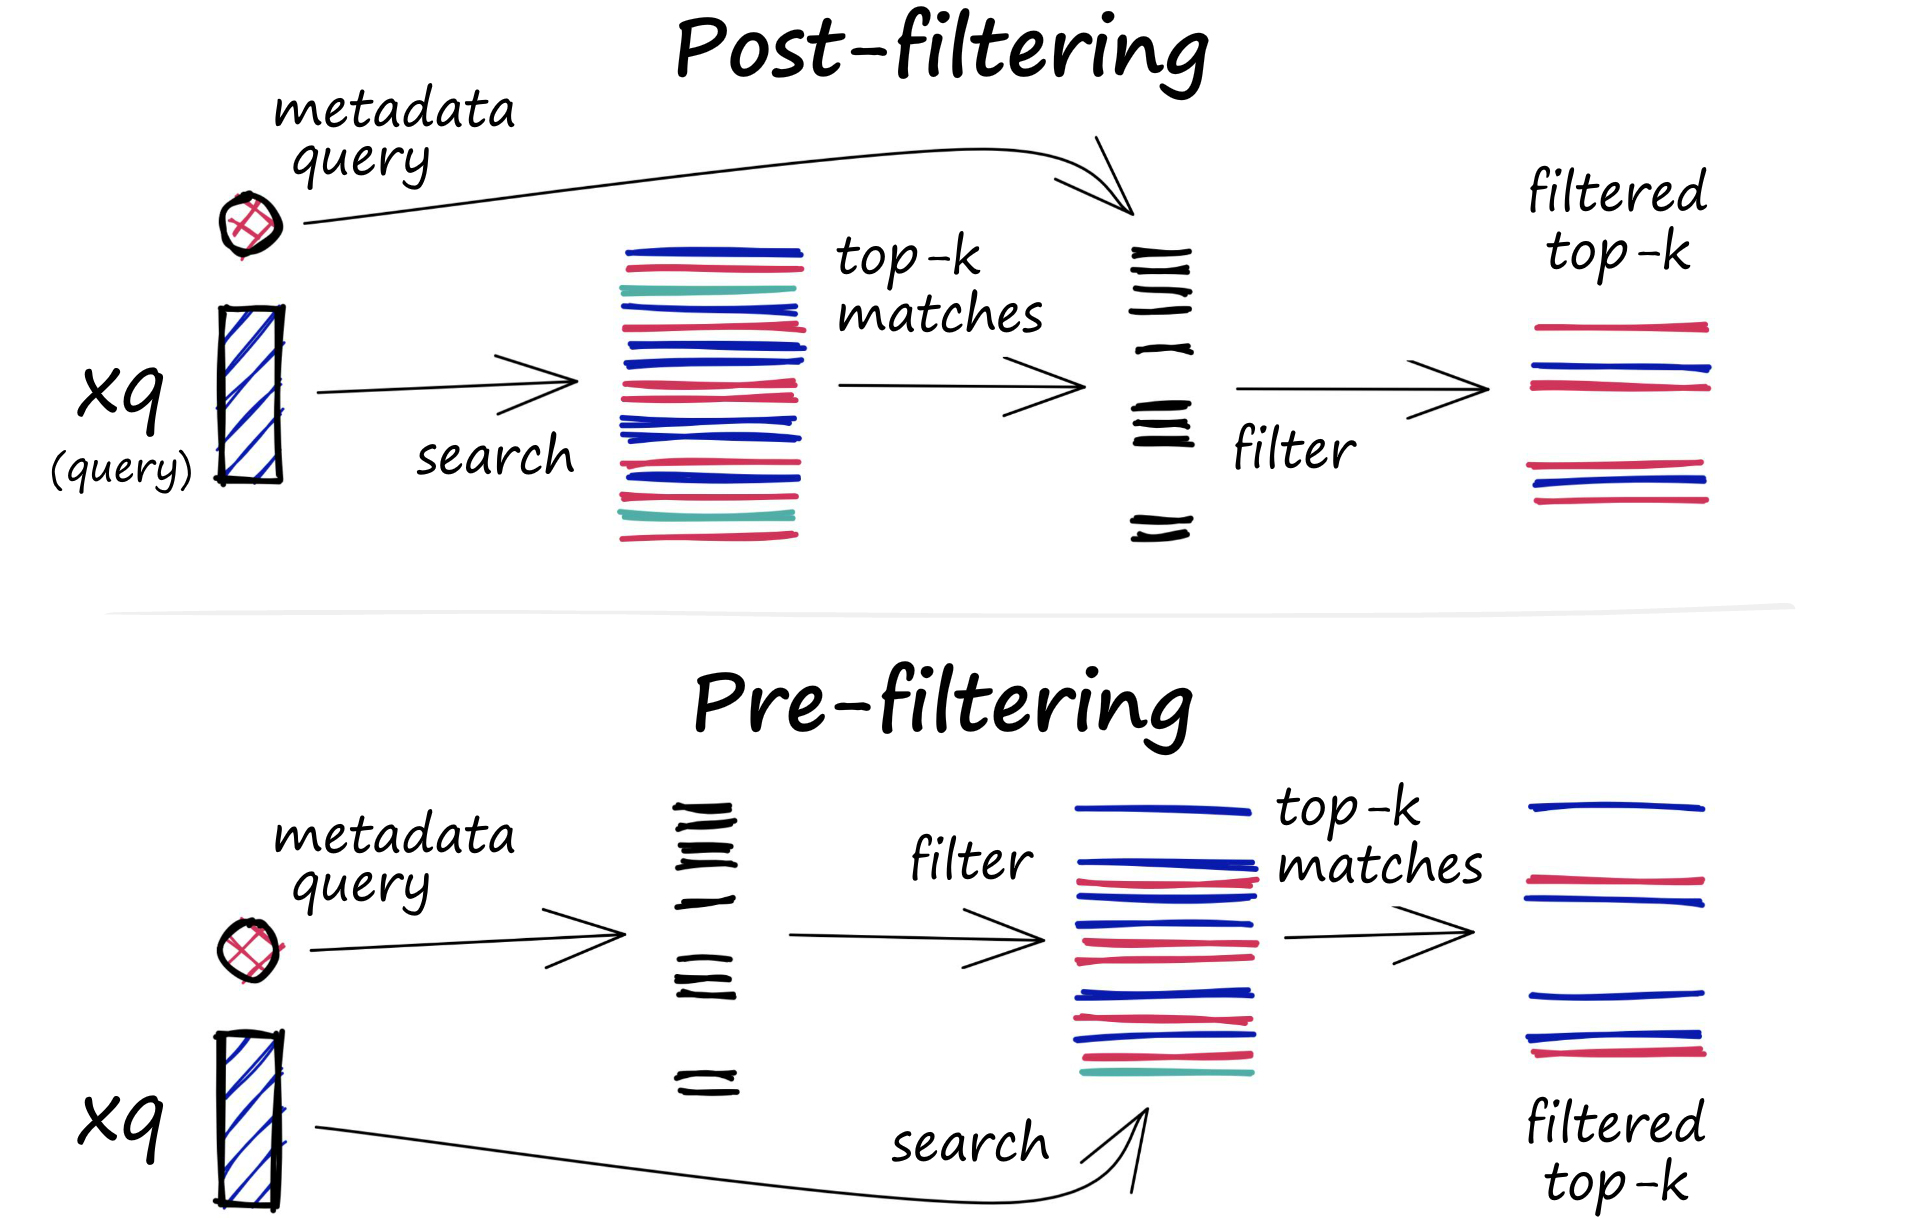 Post and pre-filtering — note that for post-filtering, we search then apply the metadata filter. For pre-filtering, we apply the metadata filter then search.